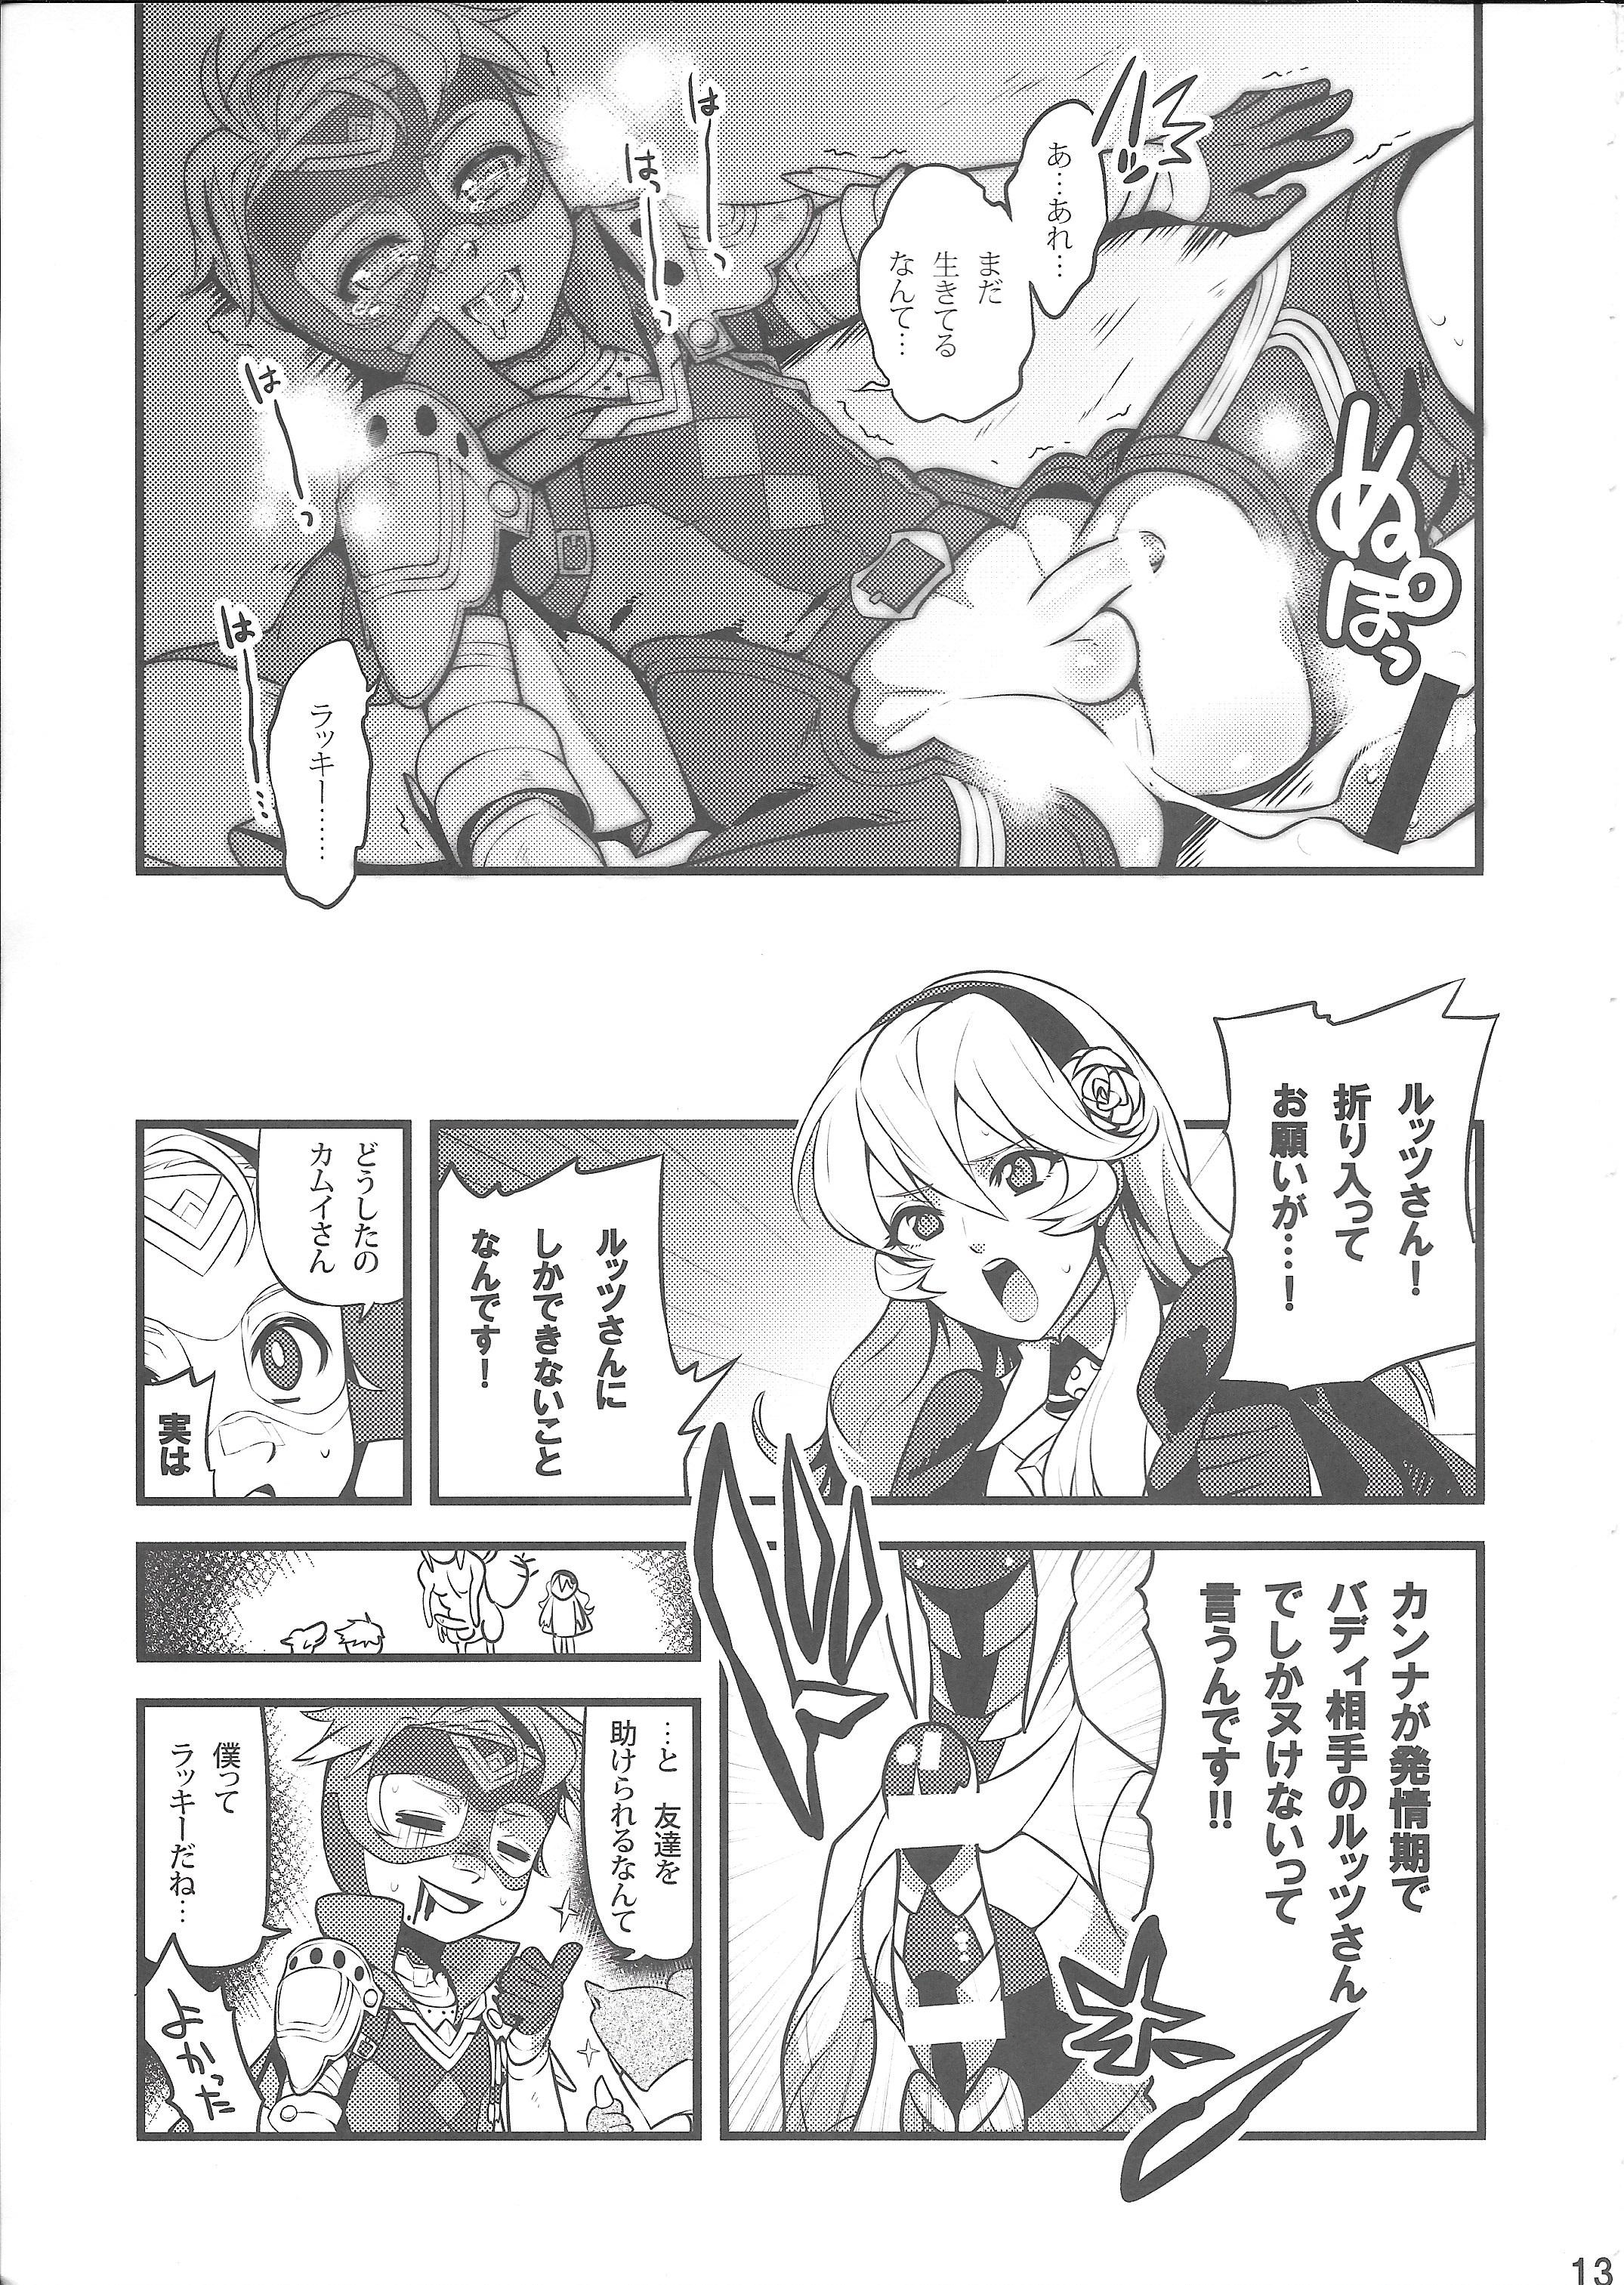 Teenxxx September 5 to 8 - Fire emblem if Toy - Page 12